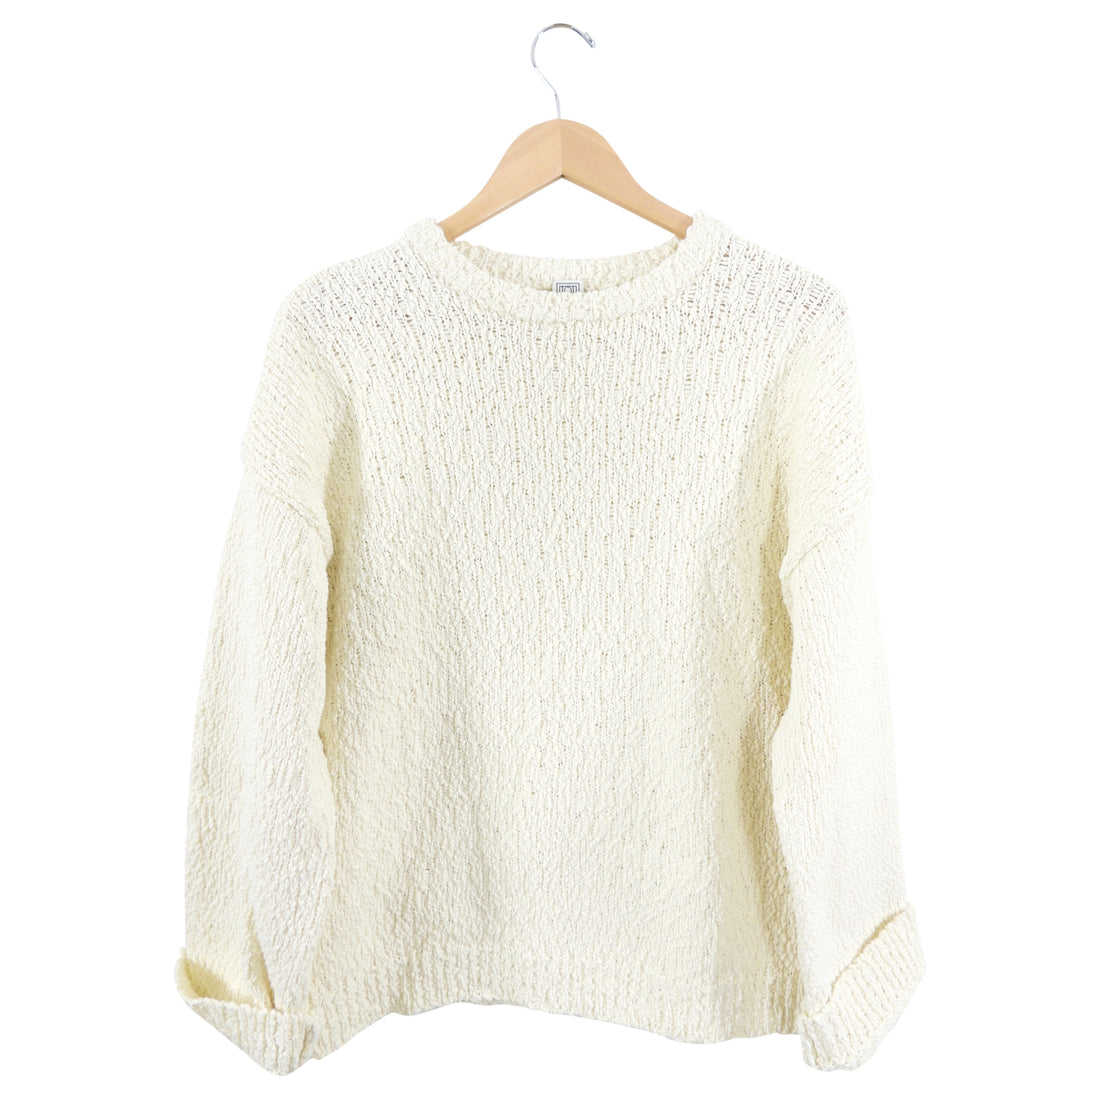 Toteme Ivory Boucle Knit Sweater - S